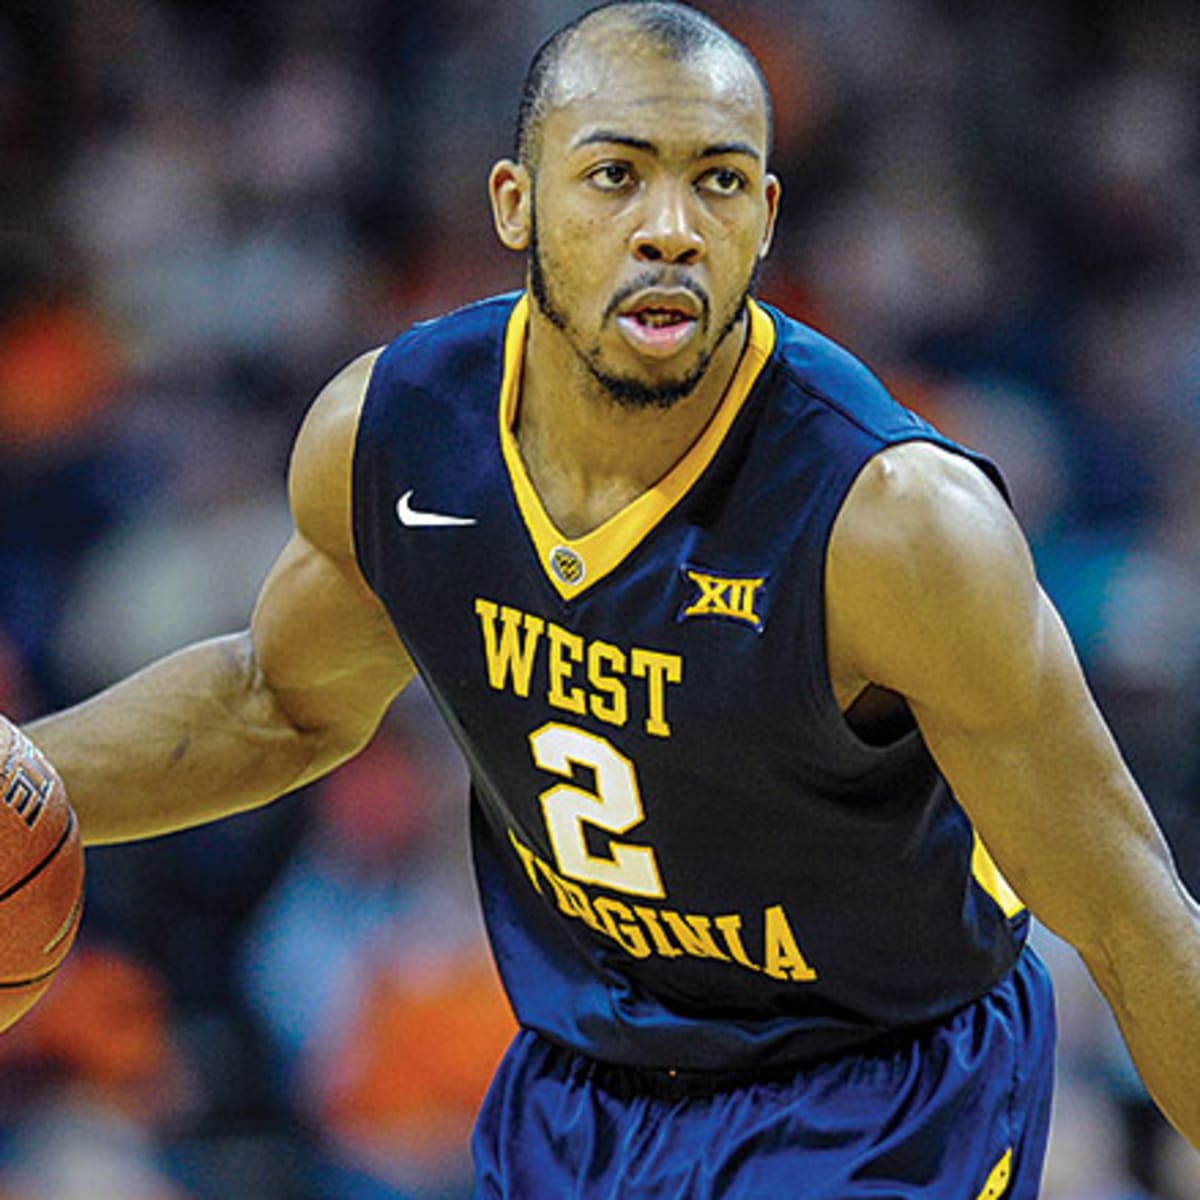 WVU basketball's Jevon Carter wins NABC Defensive Player of the Year, Sports